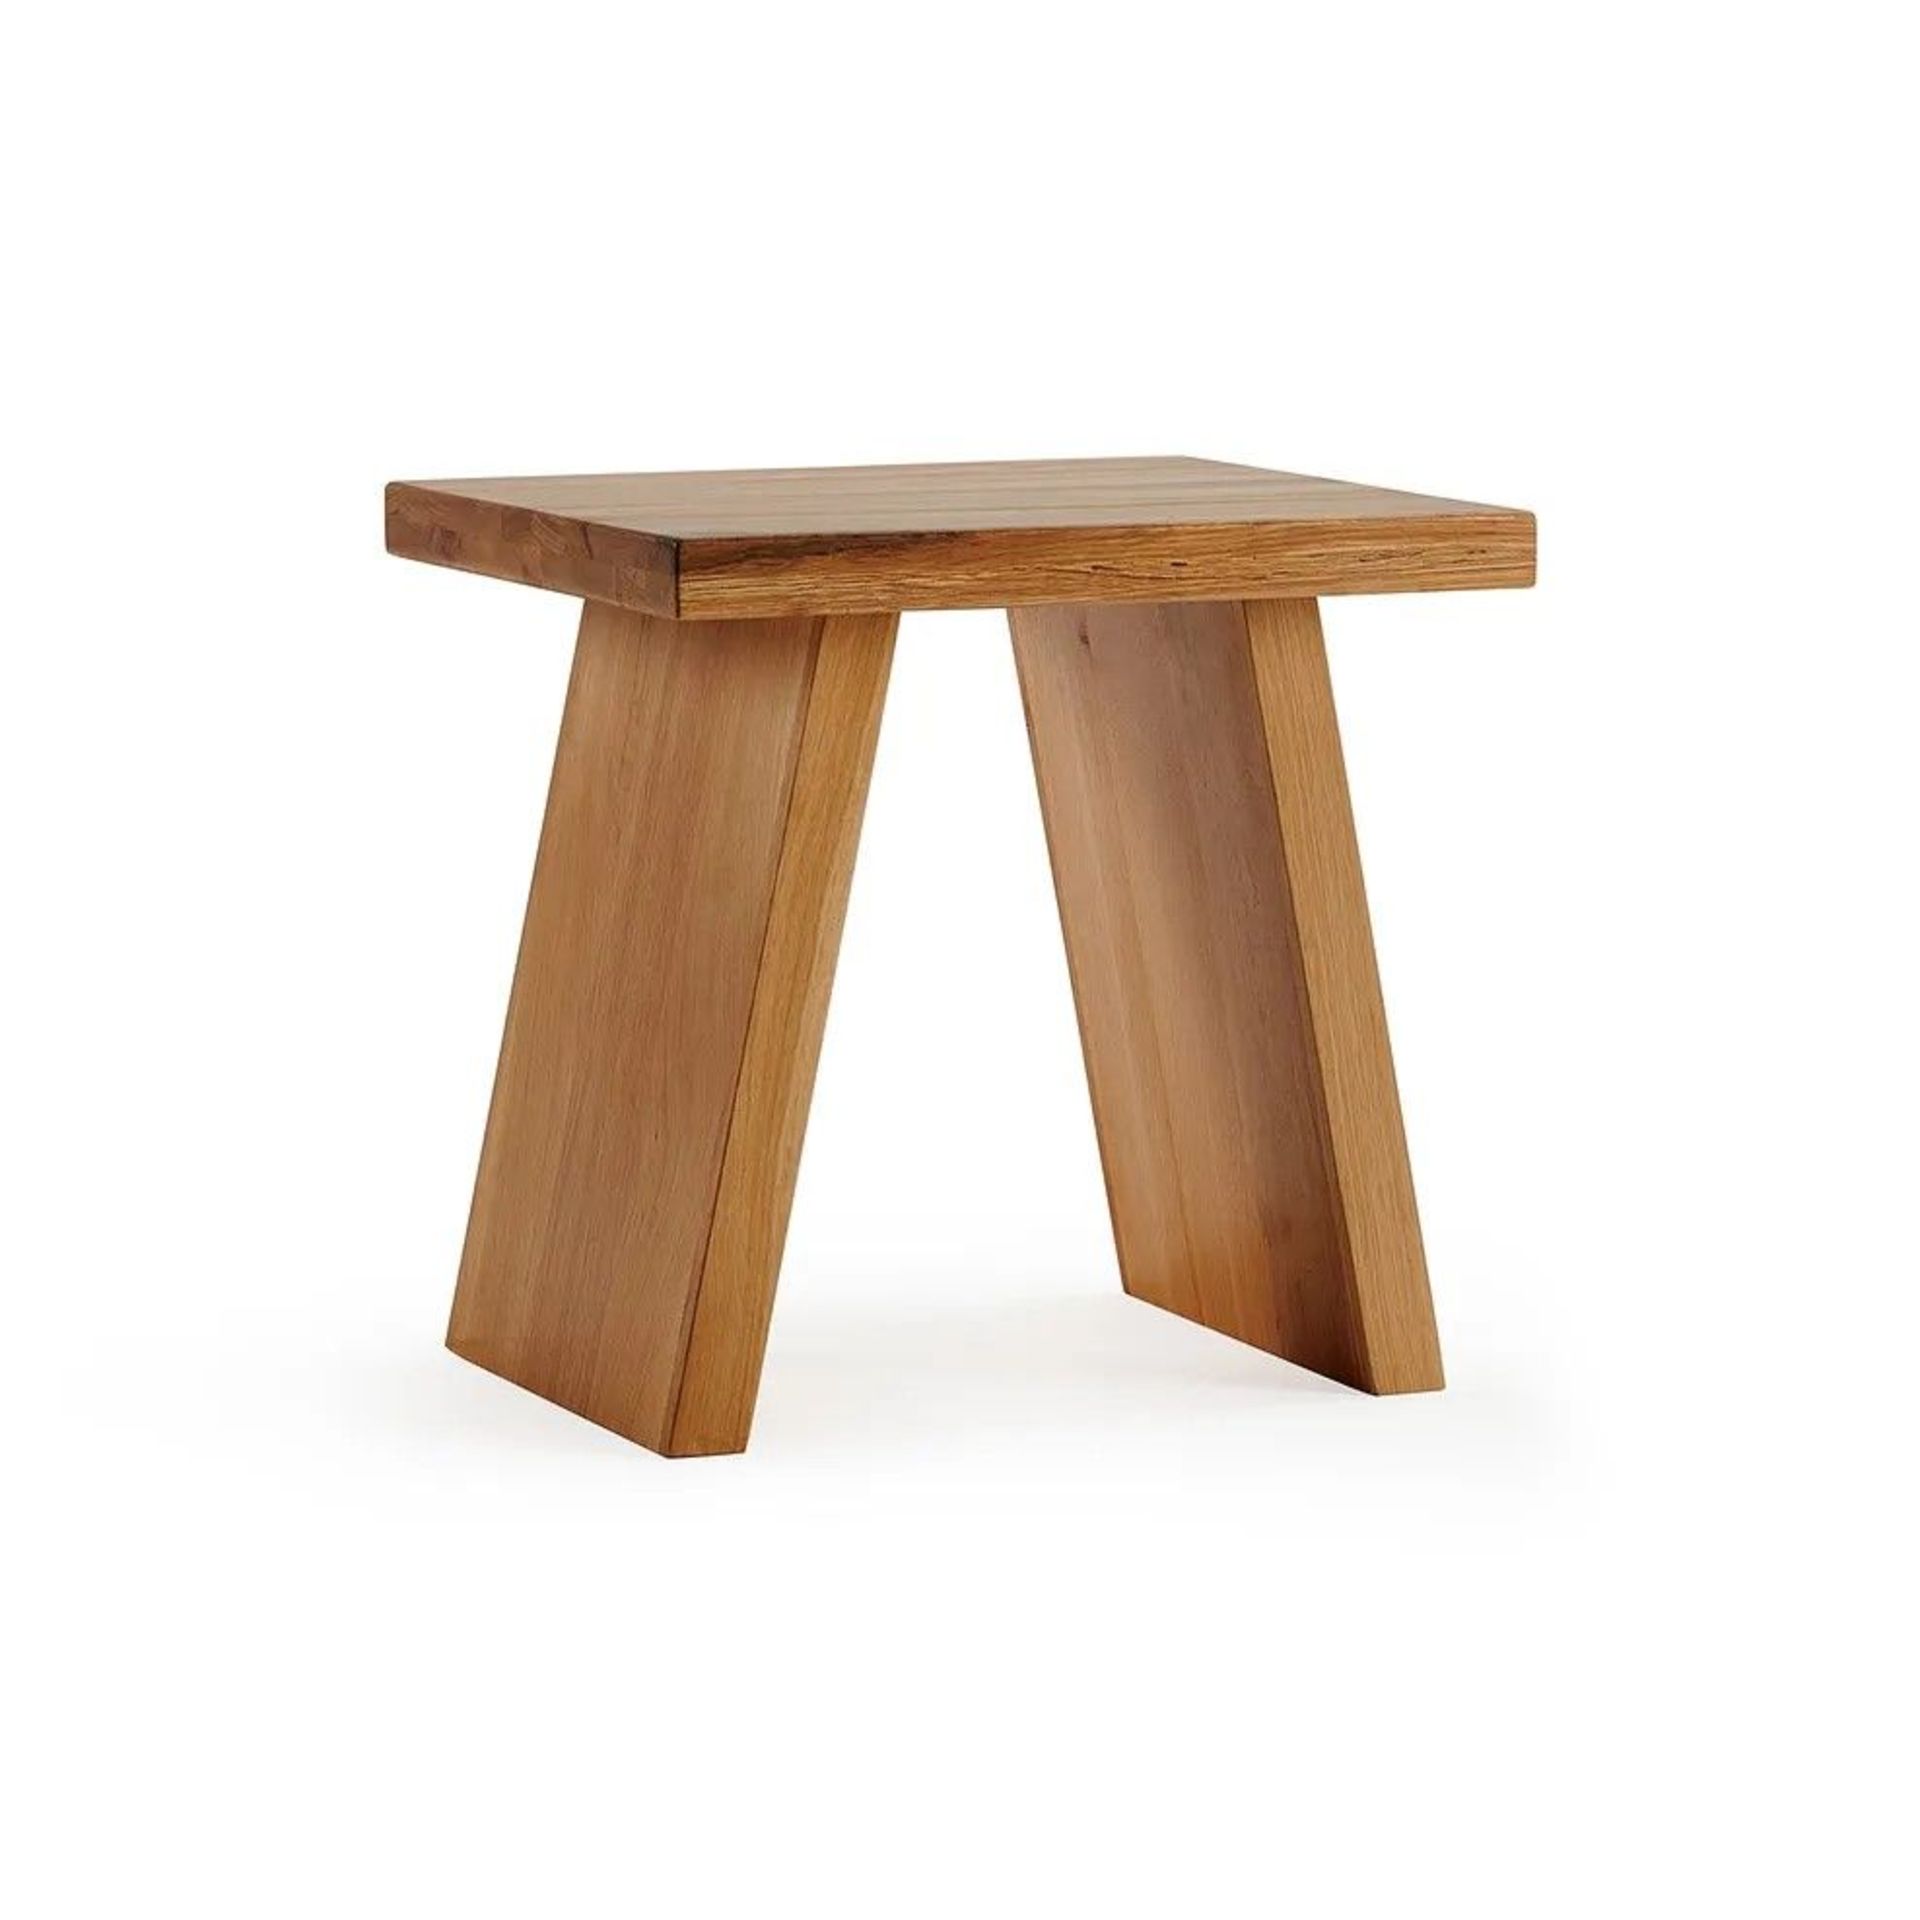 4 X NEW BOXED Natural Solid Oak Stool. RRP £130 EACH, TOTAL RRP £520.(NCH001STN) For a more open - Image 2 of 2